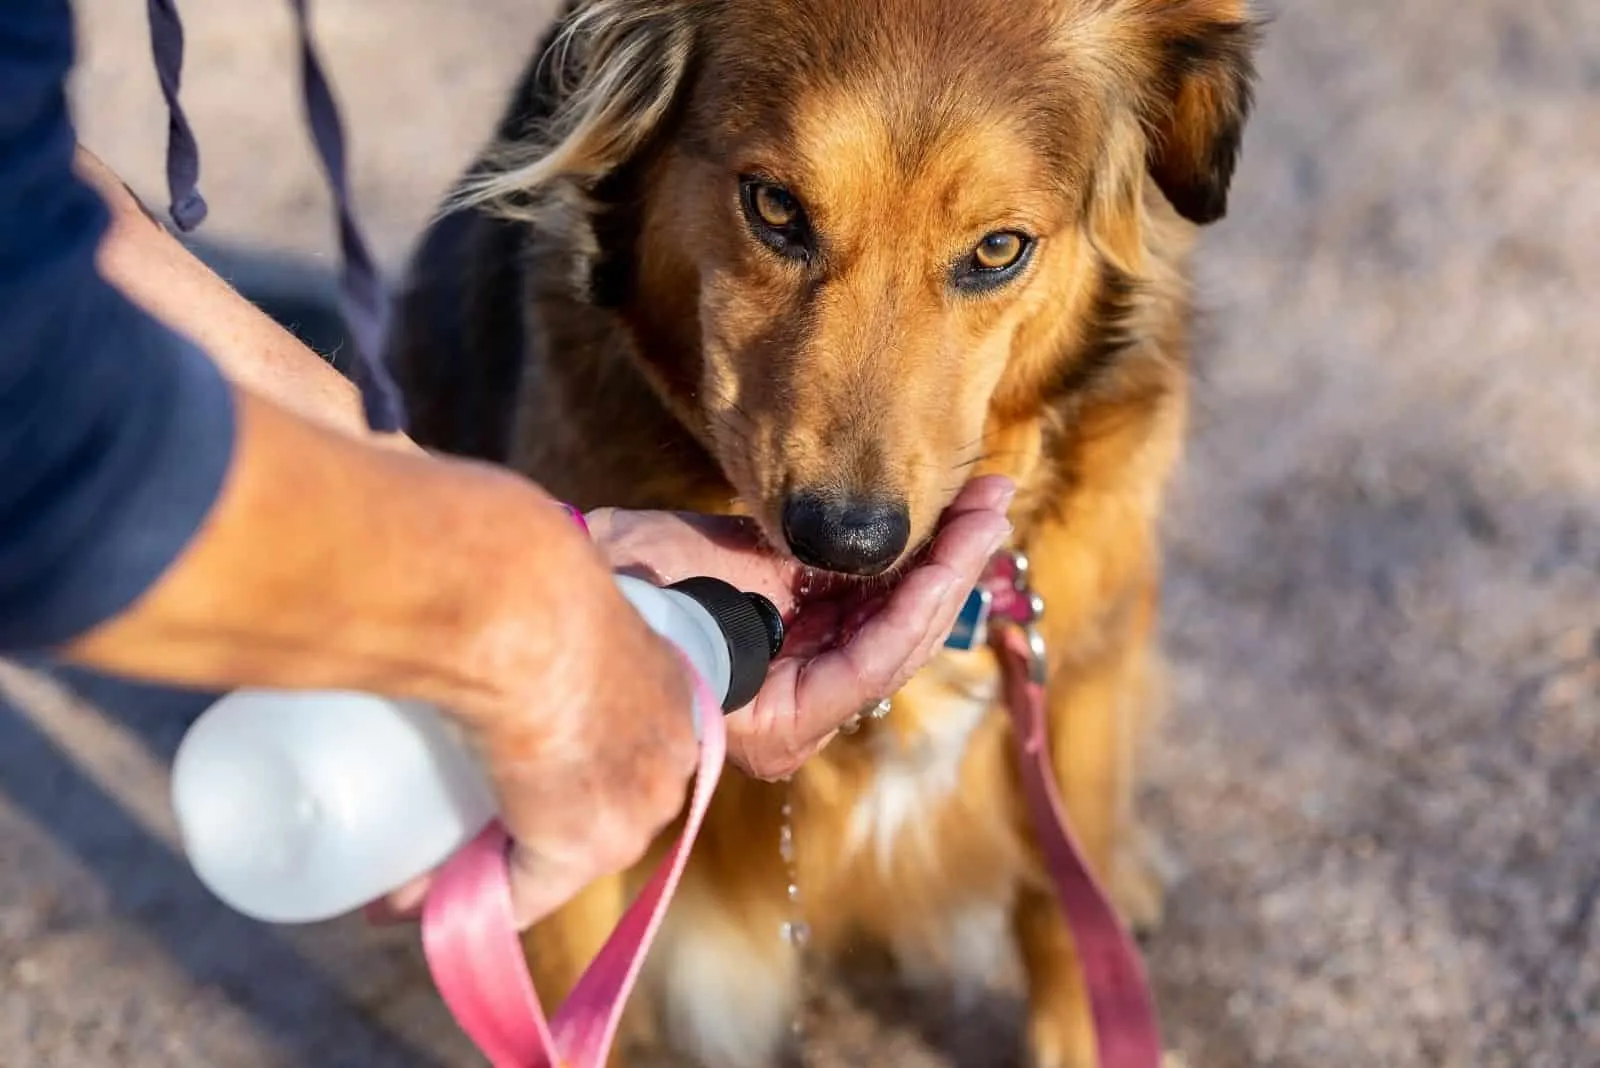 person helping dog drink water with his hands 